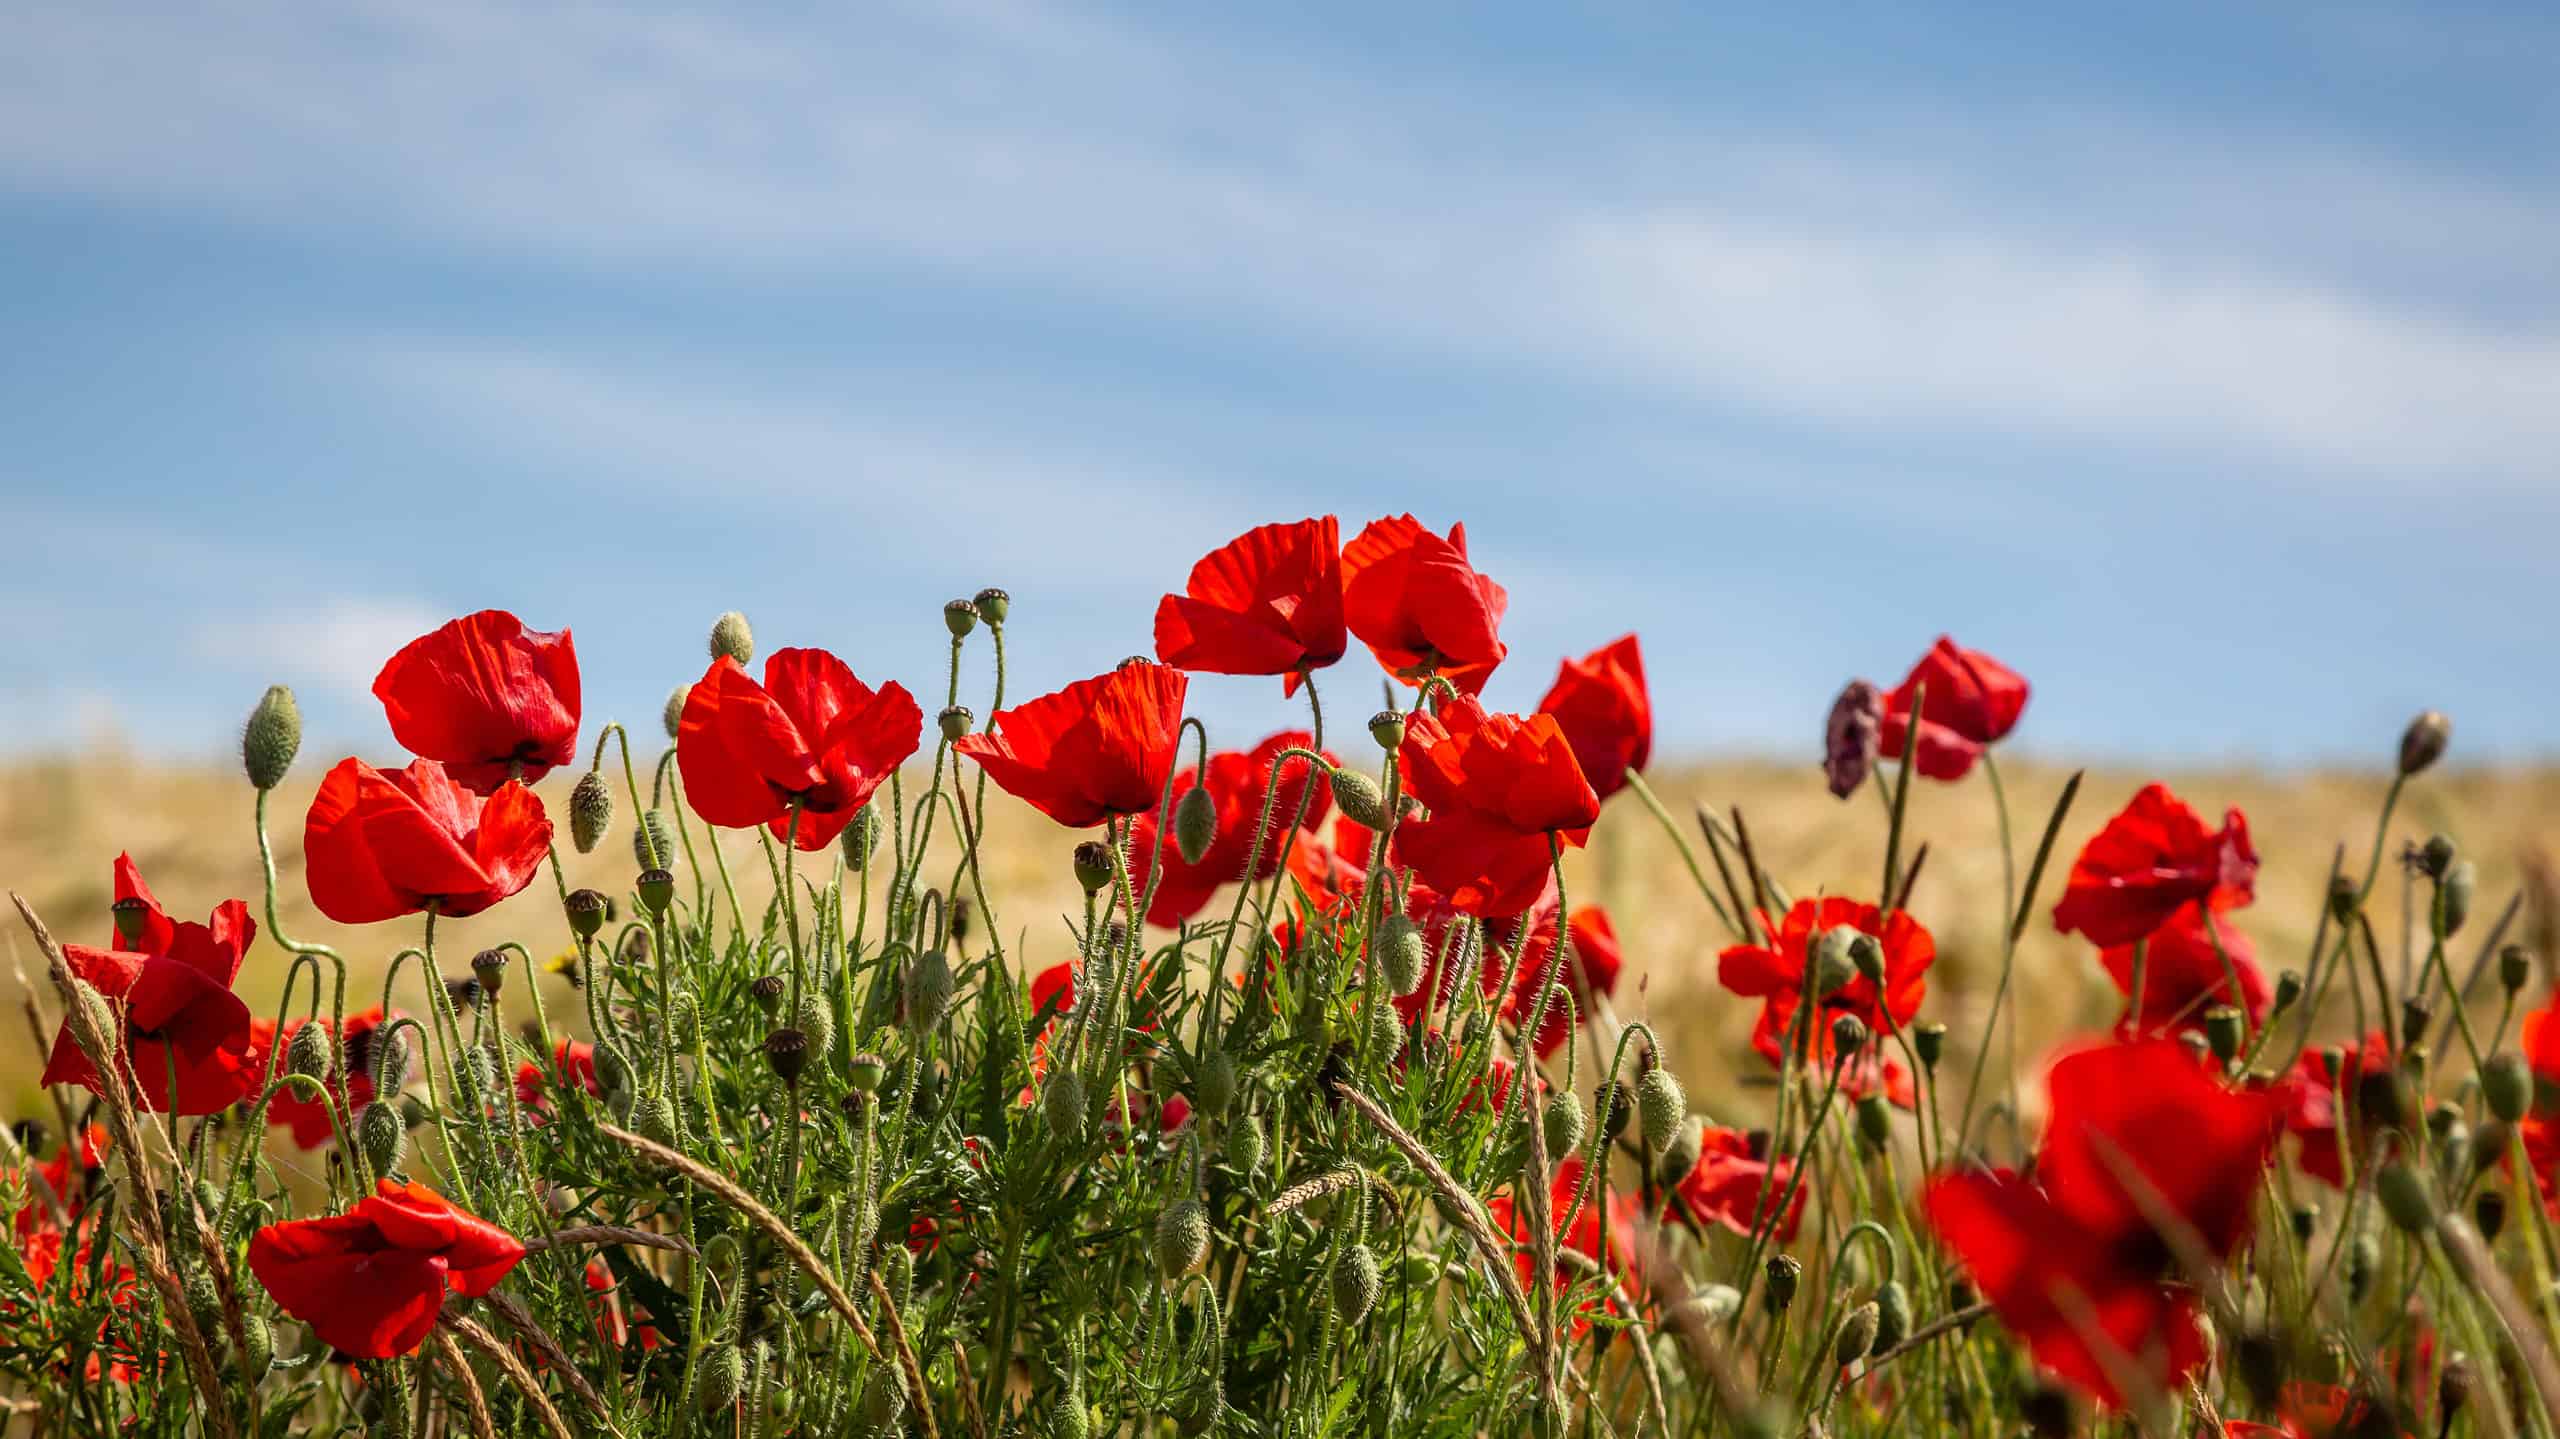 Vibrant poppies with a blue sky overhead